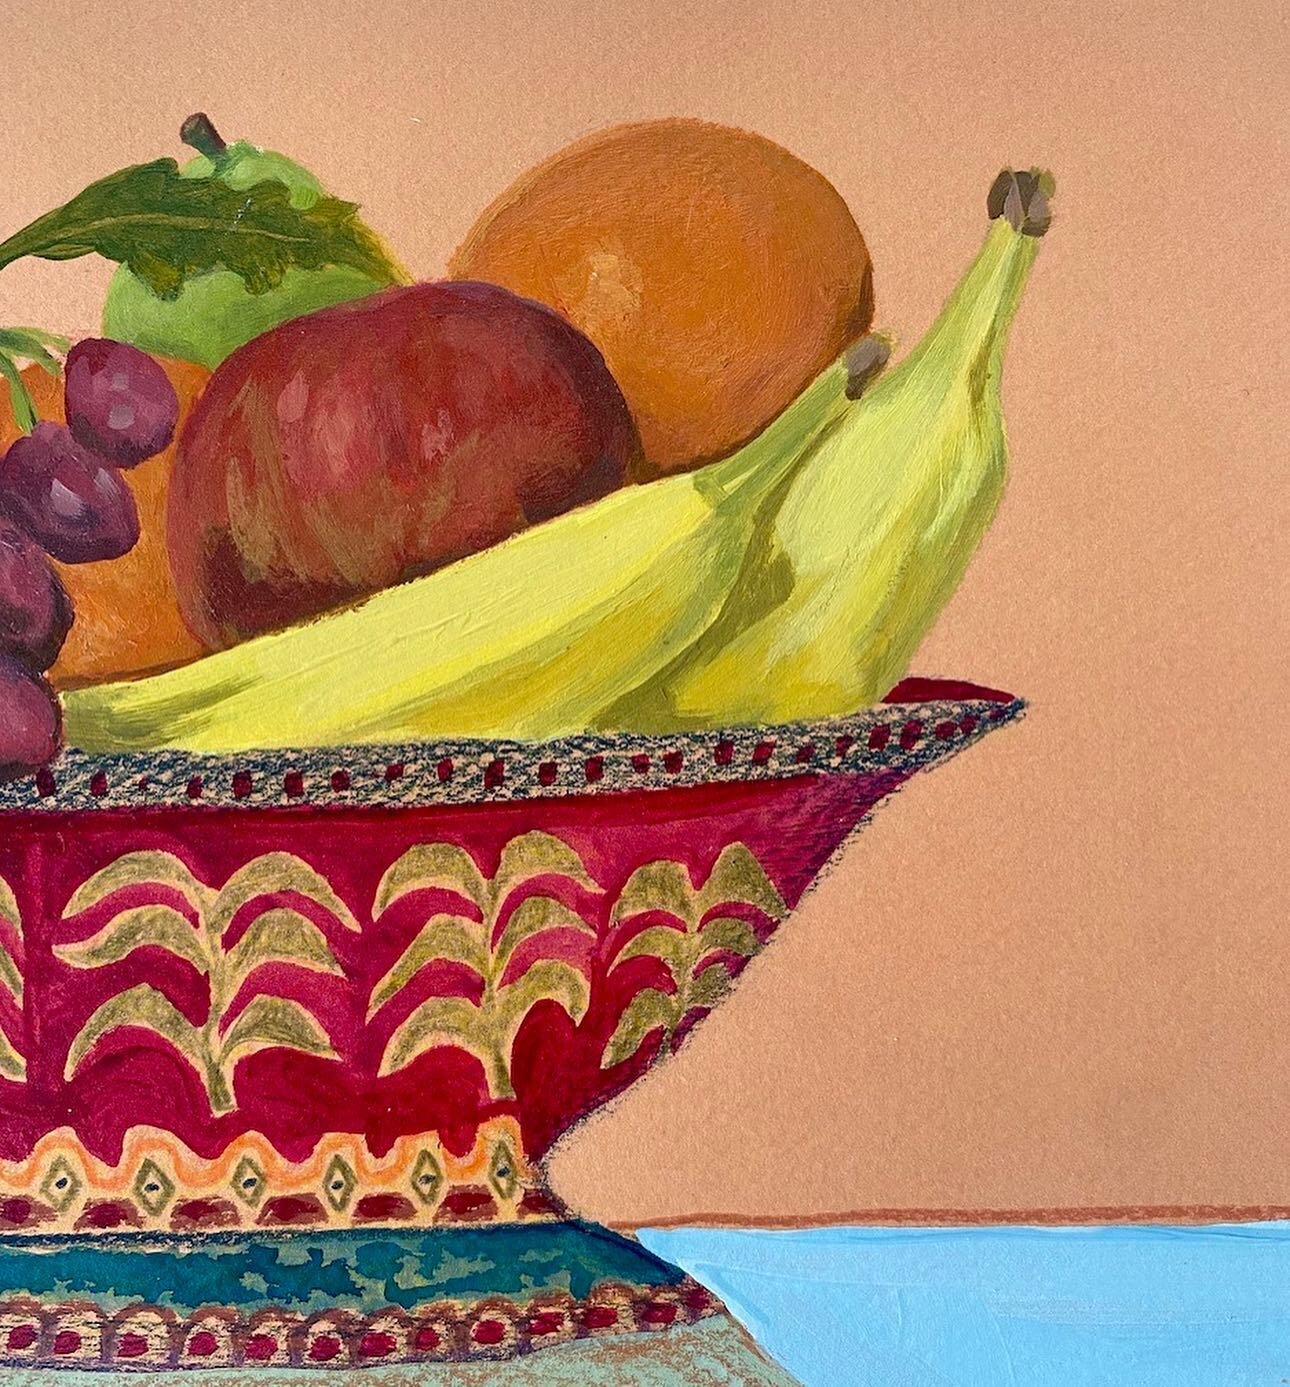 summertime fruit bowls💛 &ldquo;Linen Pants and Flip Flops&rdquo; is inspired by travels, mornings in the sunshine, and refreshing afternoon snacks 🍇🍊🍌🍎

8.5&rdquo;x11&rdquo;mixed media on paper available through @kentcollective_ 

#madisonfinear